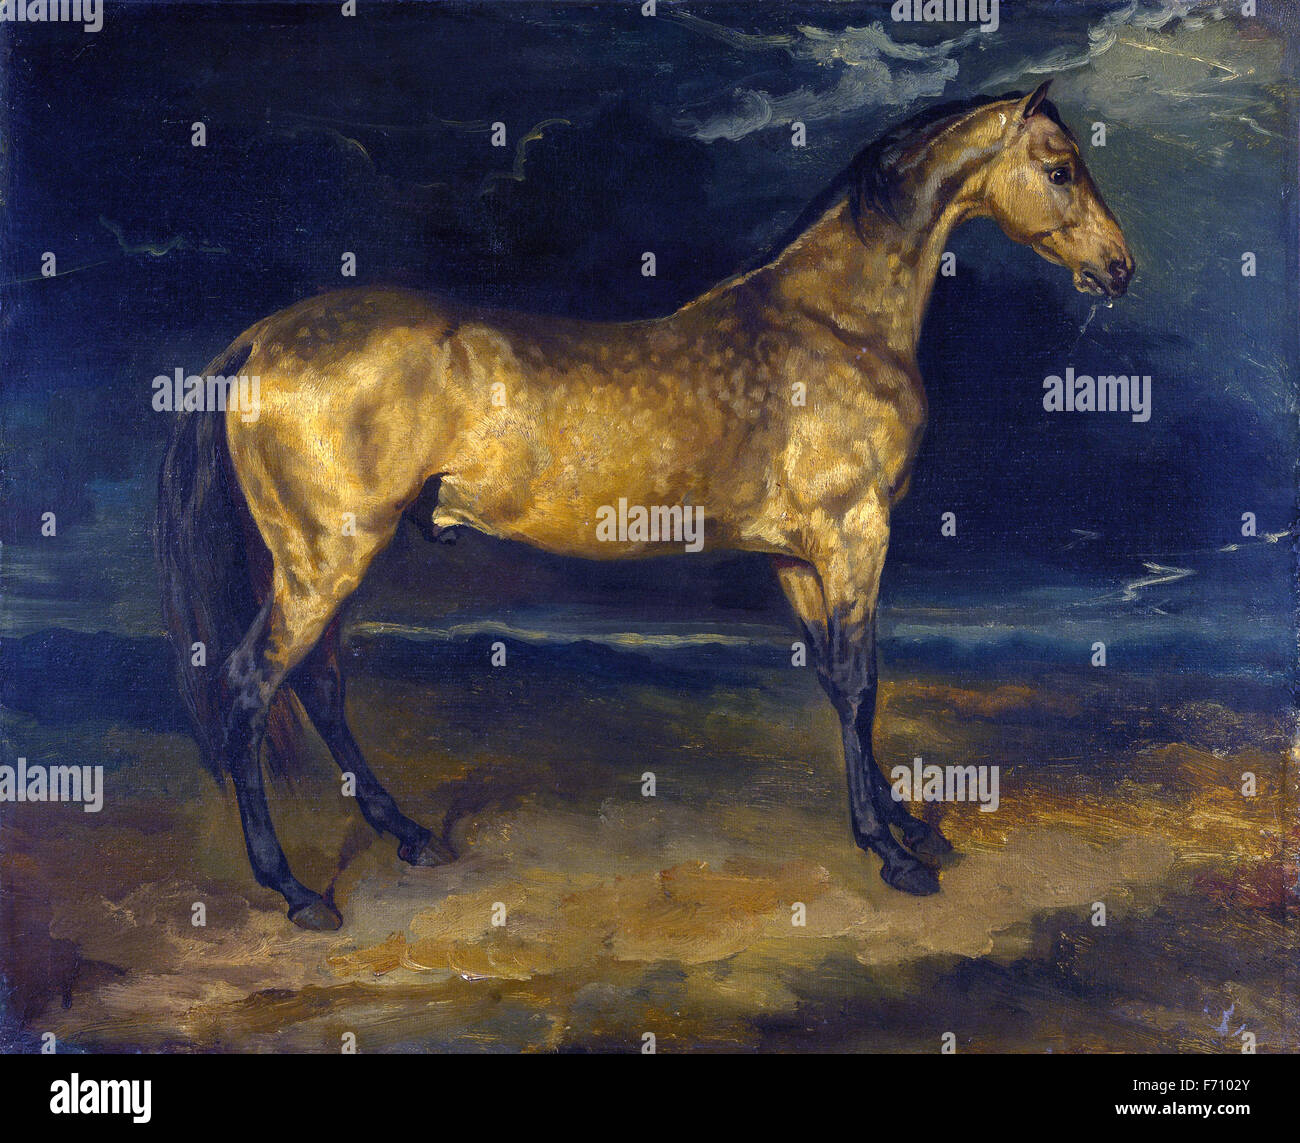 Théodore Géricault - A Horse frightened by Lightning Stock Photo